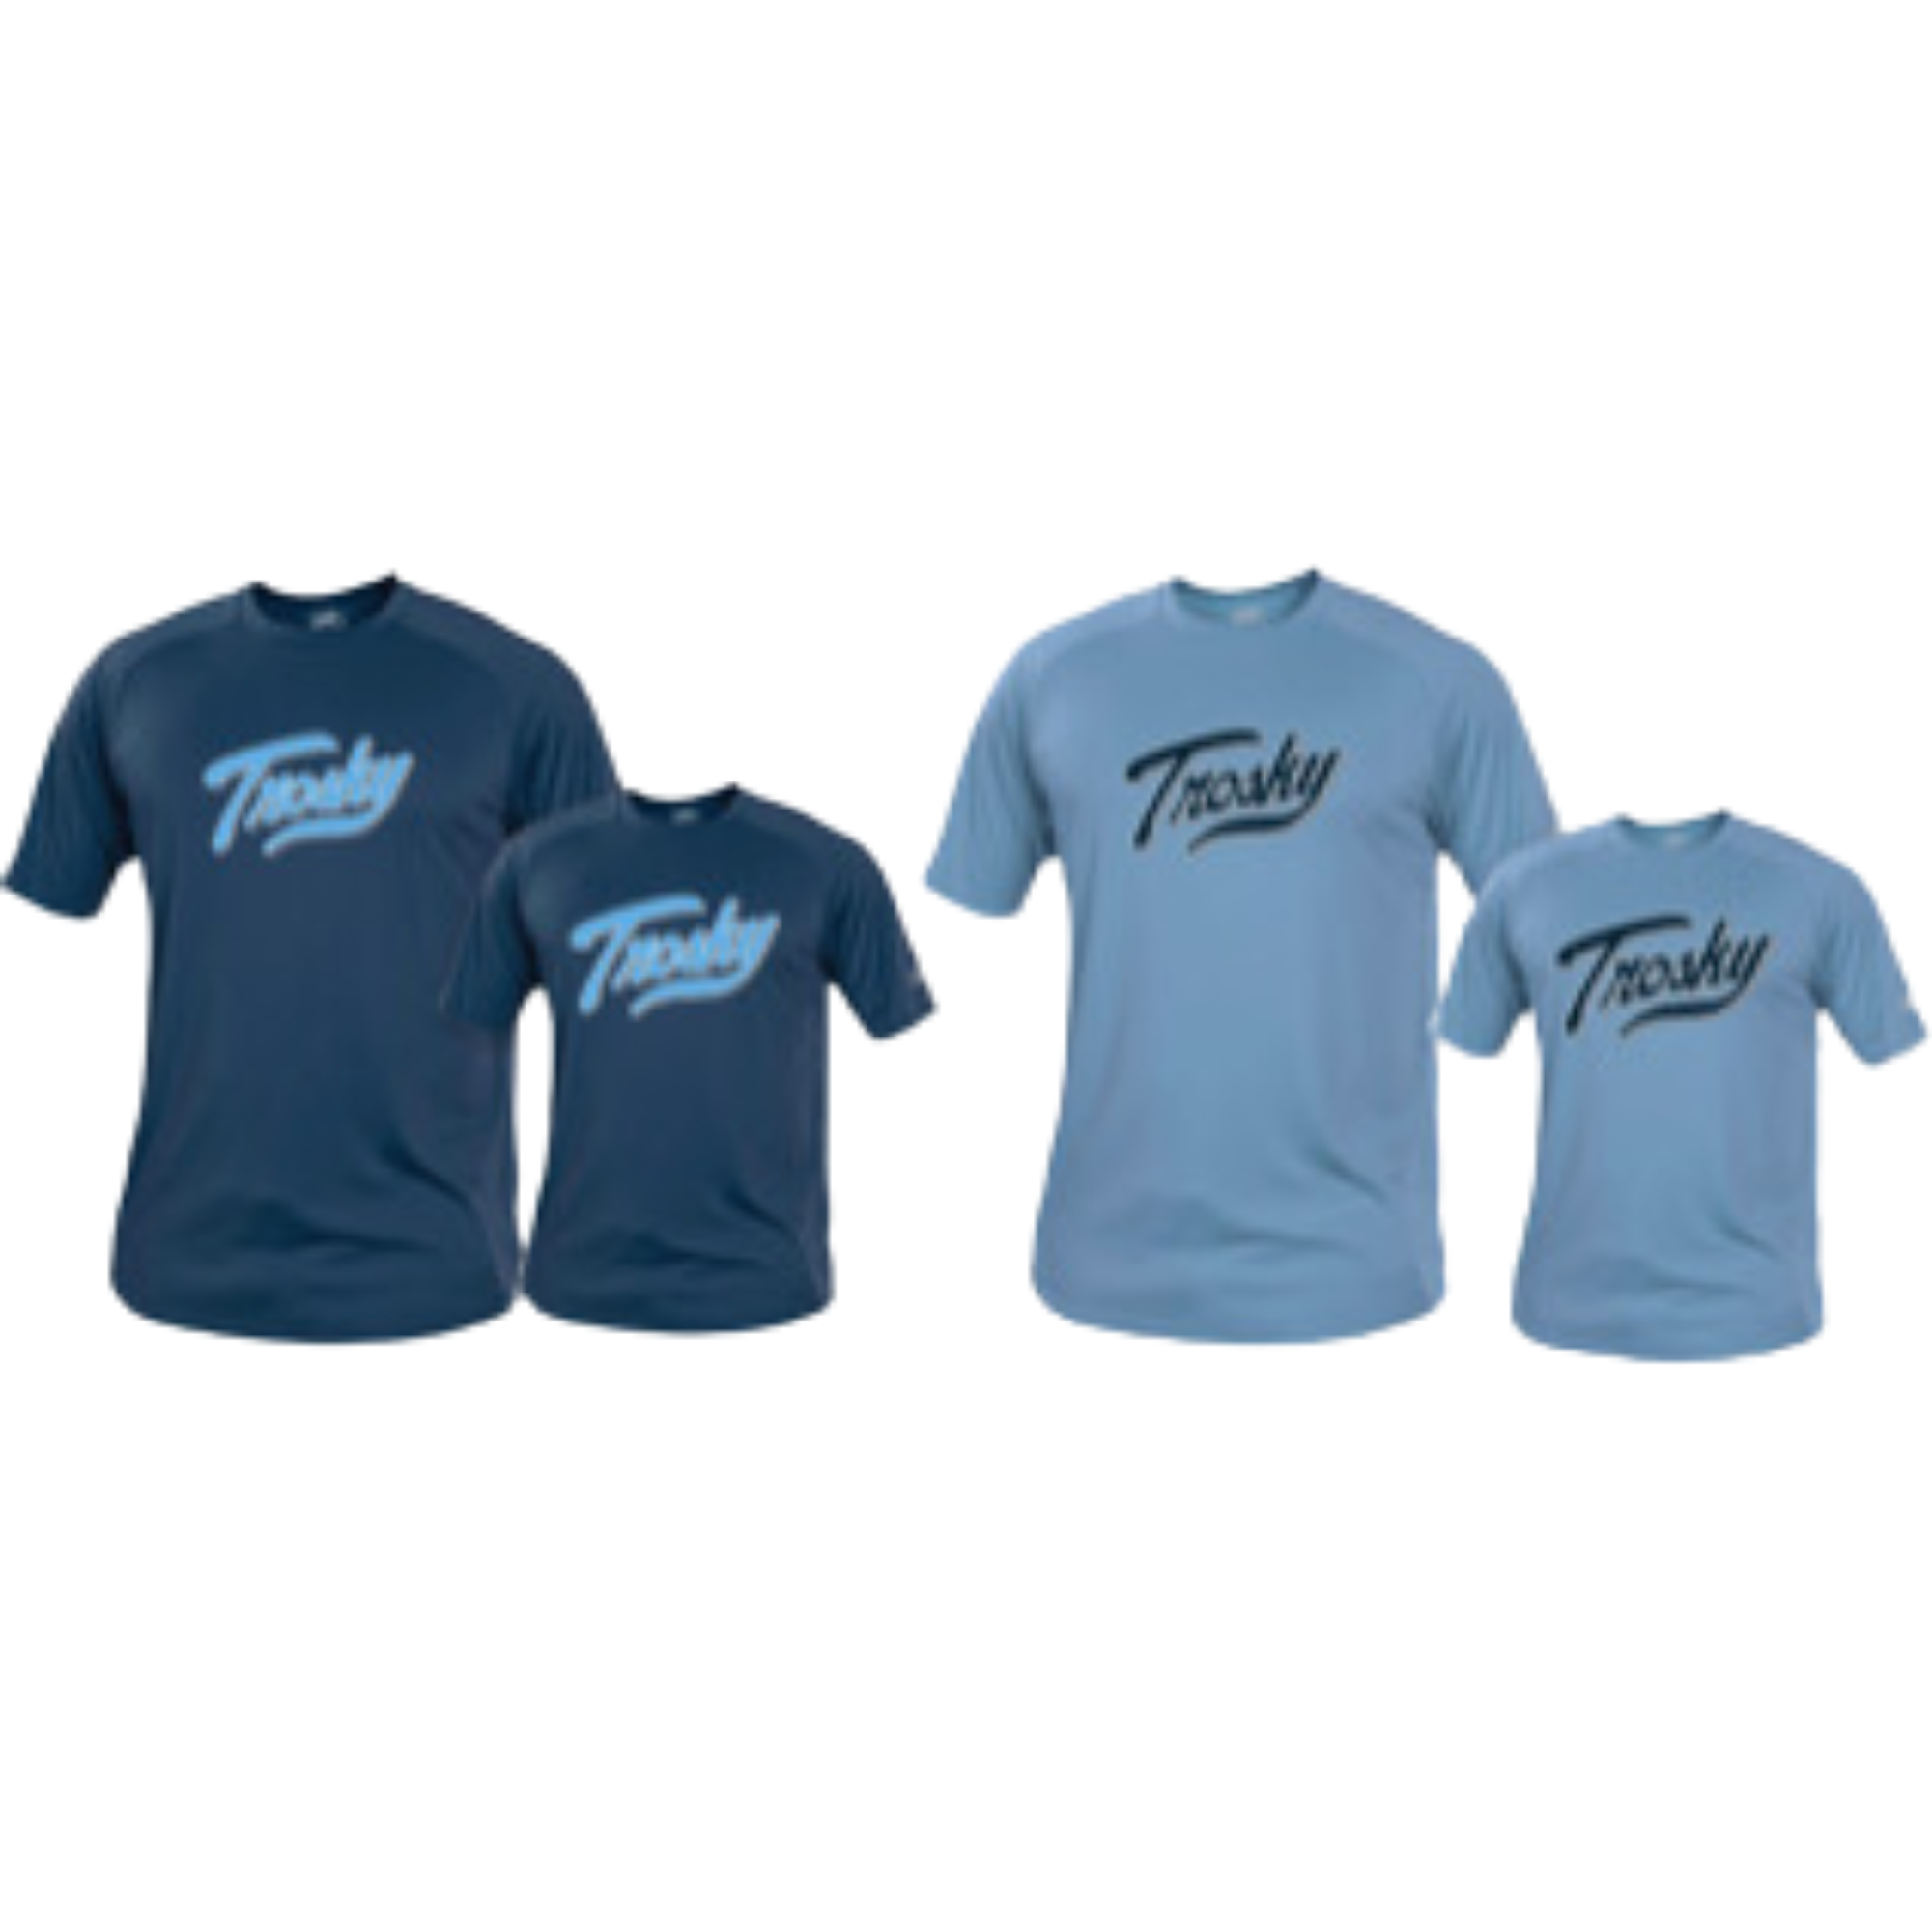 Rawlings Adult Trosky Fan Gear Numbered Performance Tee (set of 2 Col. Blue & Navy) XXL